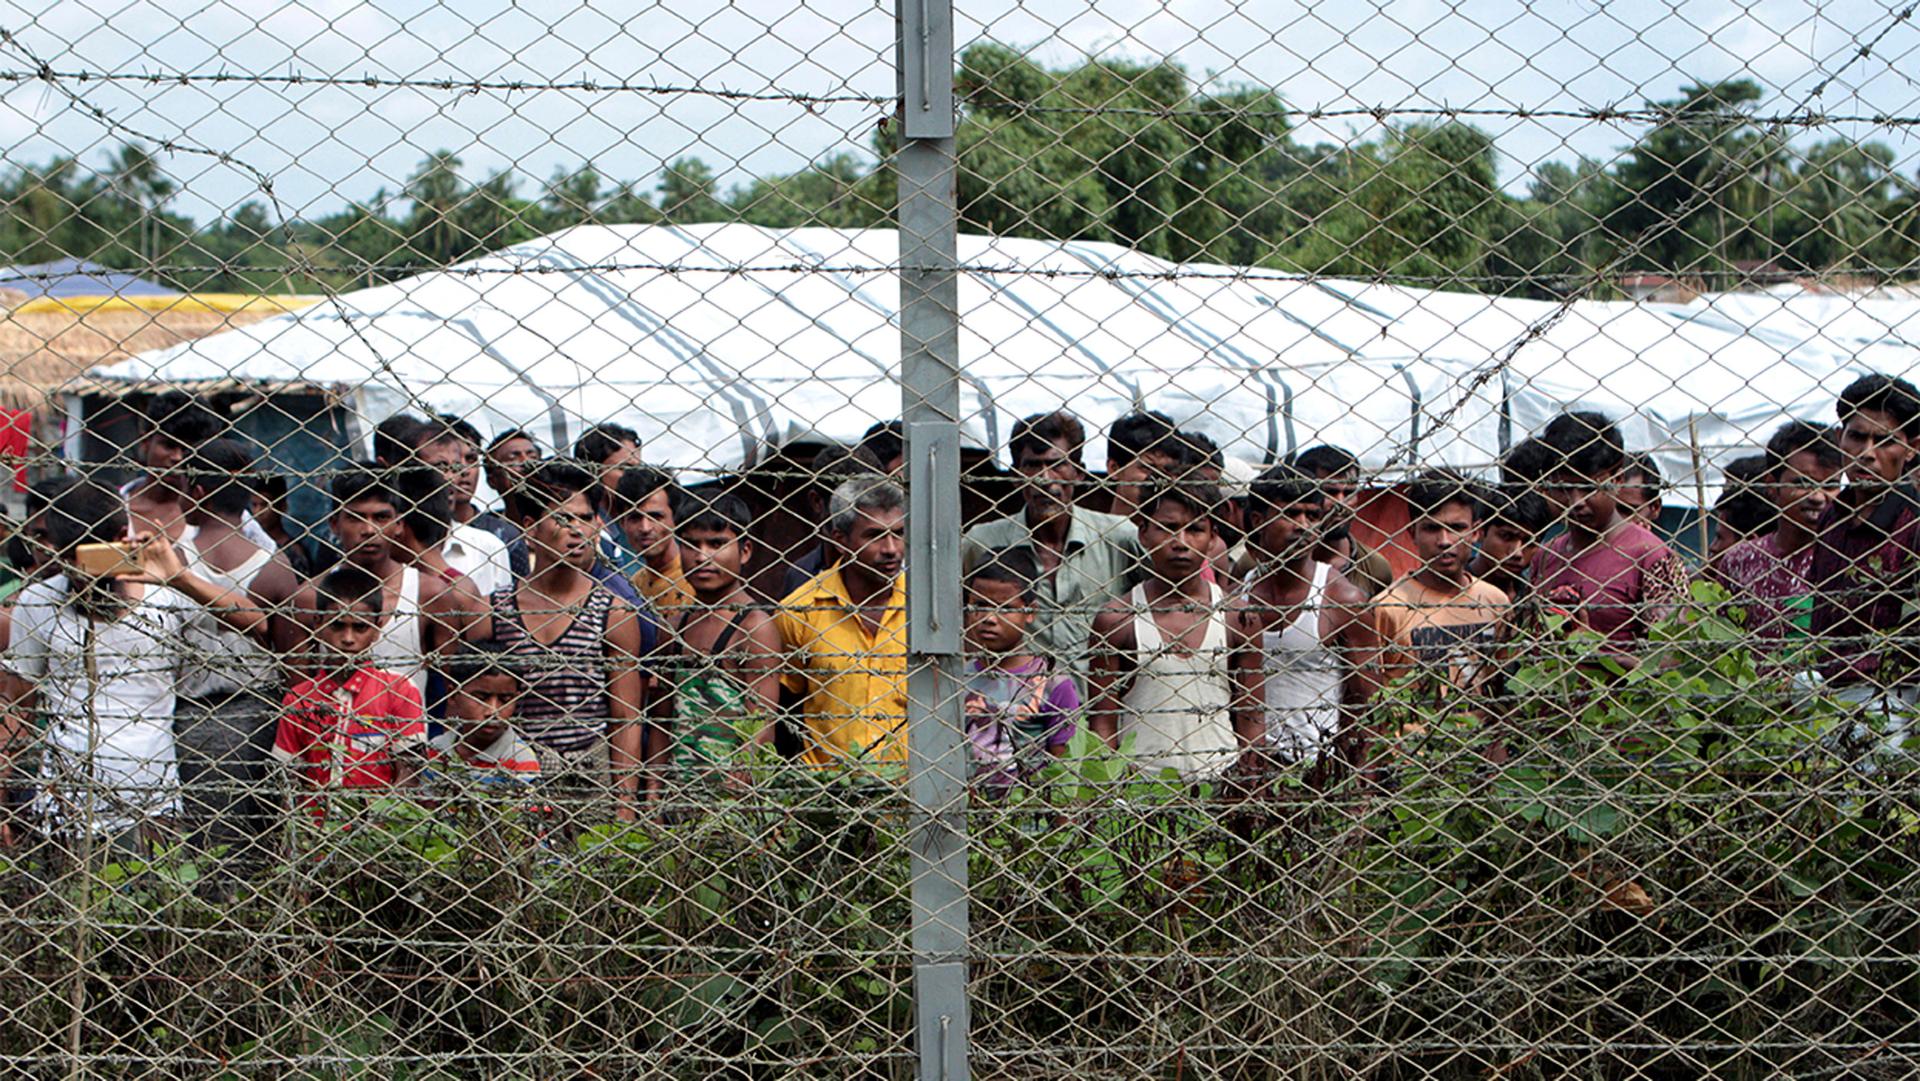 Rohingya refugees gather near a fence during a government organized media tour, to a no-man's land between Myanmar and Bangladesh, near Taungpyolatyar village, Maung Daw, northern Rakhine State, Myanmar